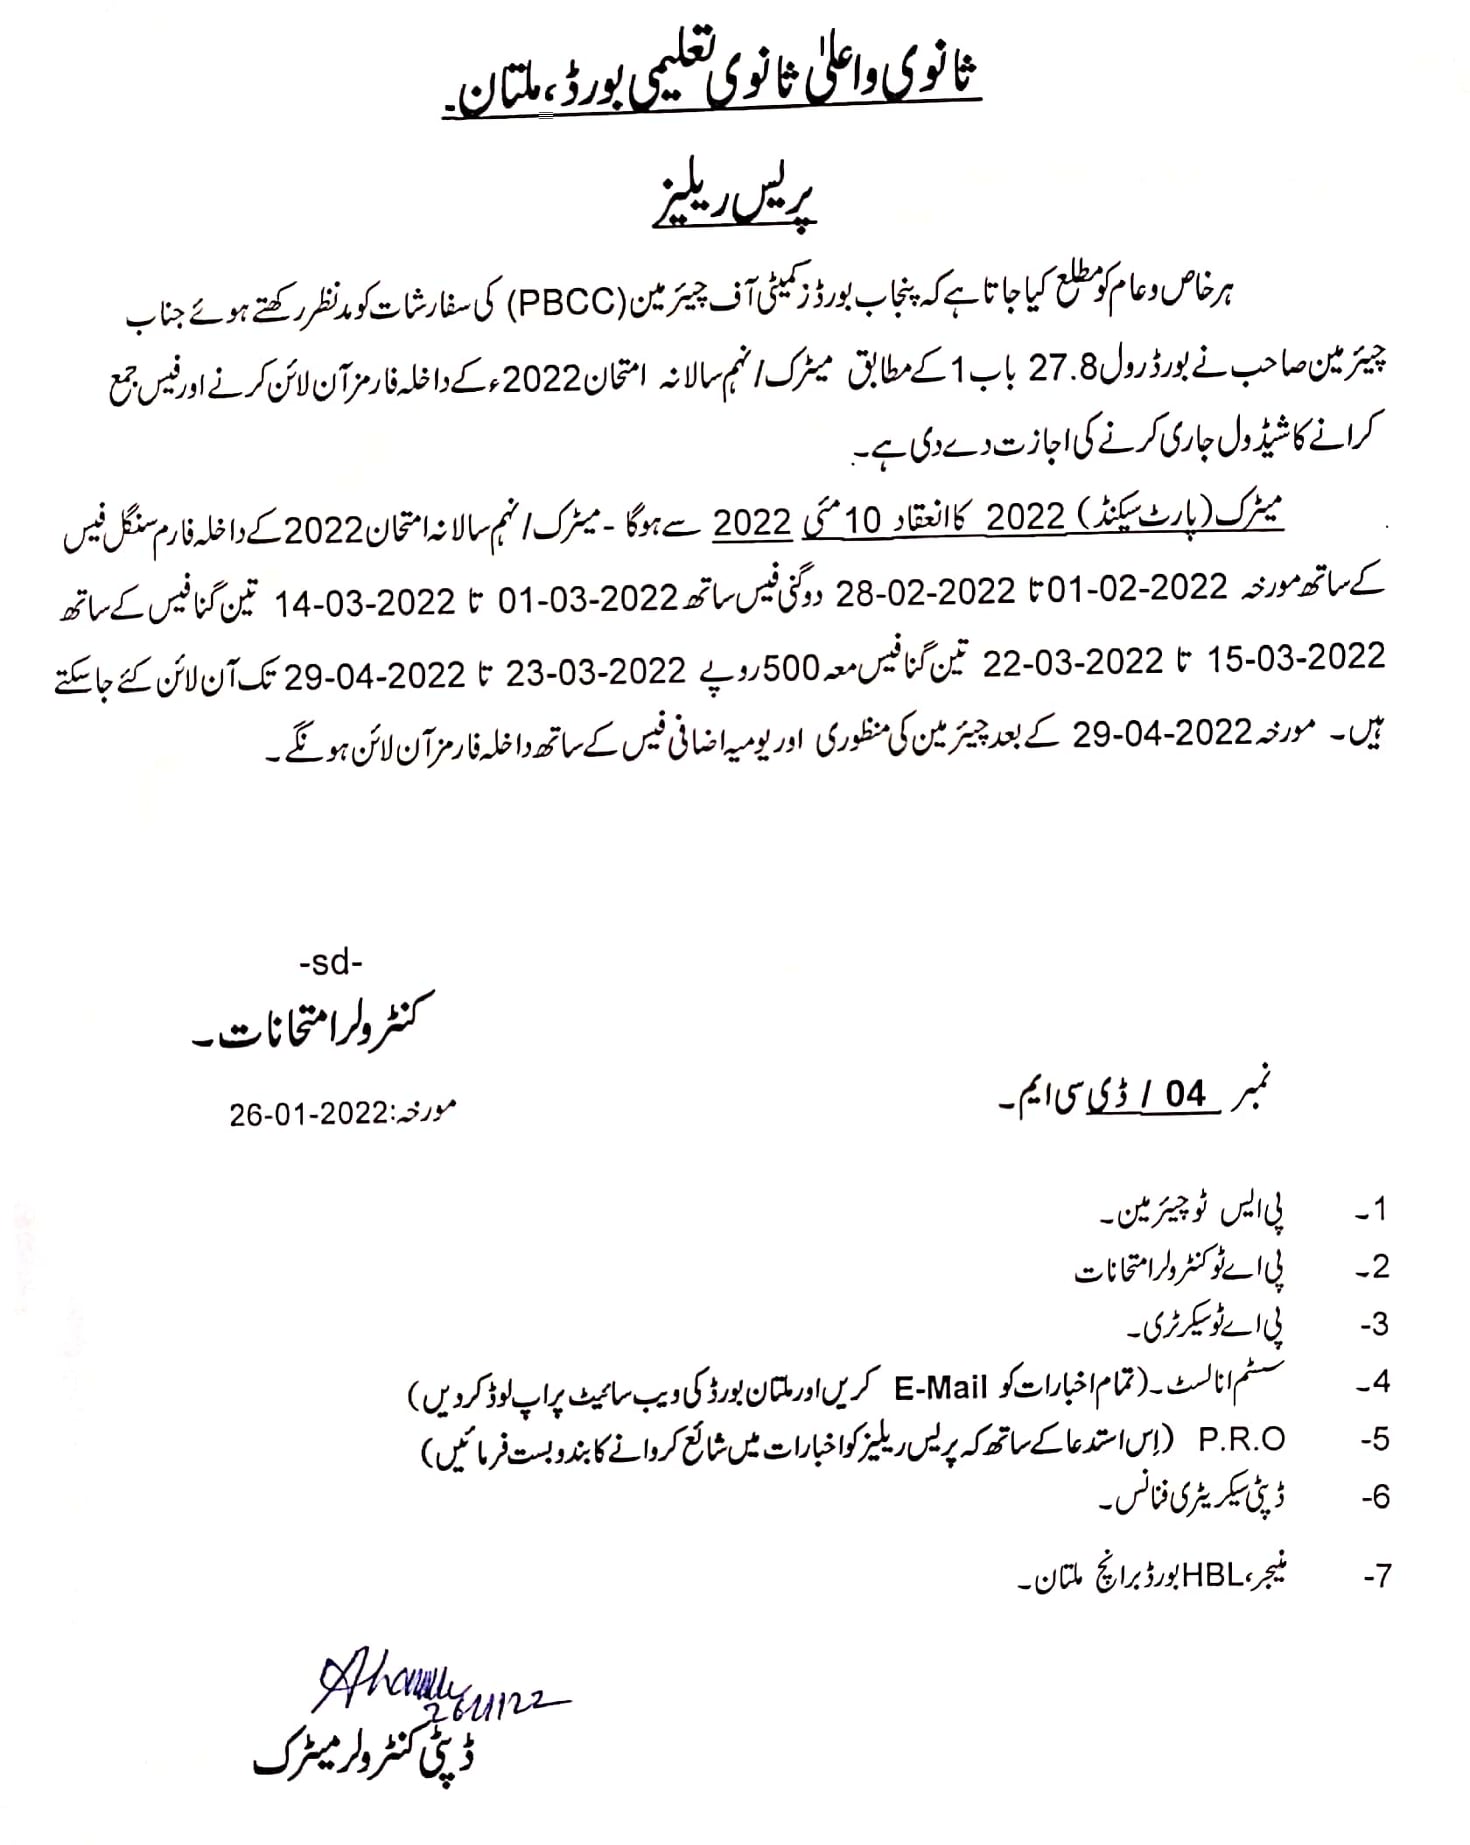 BISE Multan Online Admission Forms 2022 Exams Schedule Matric, 9th Class, Inter